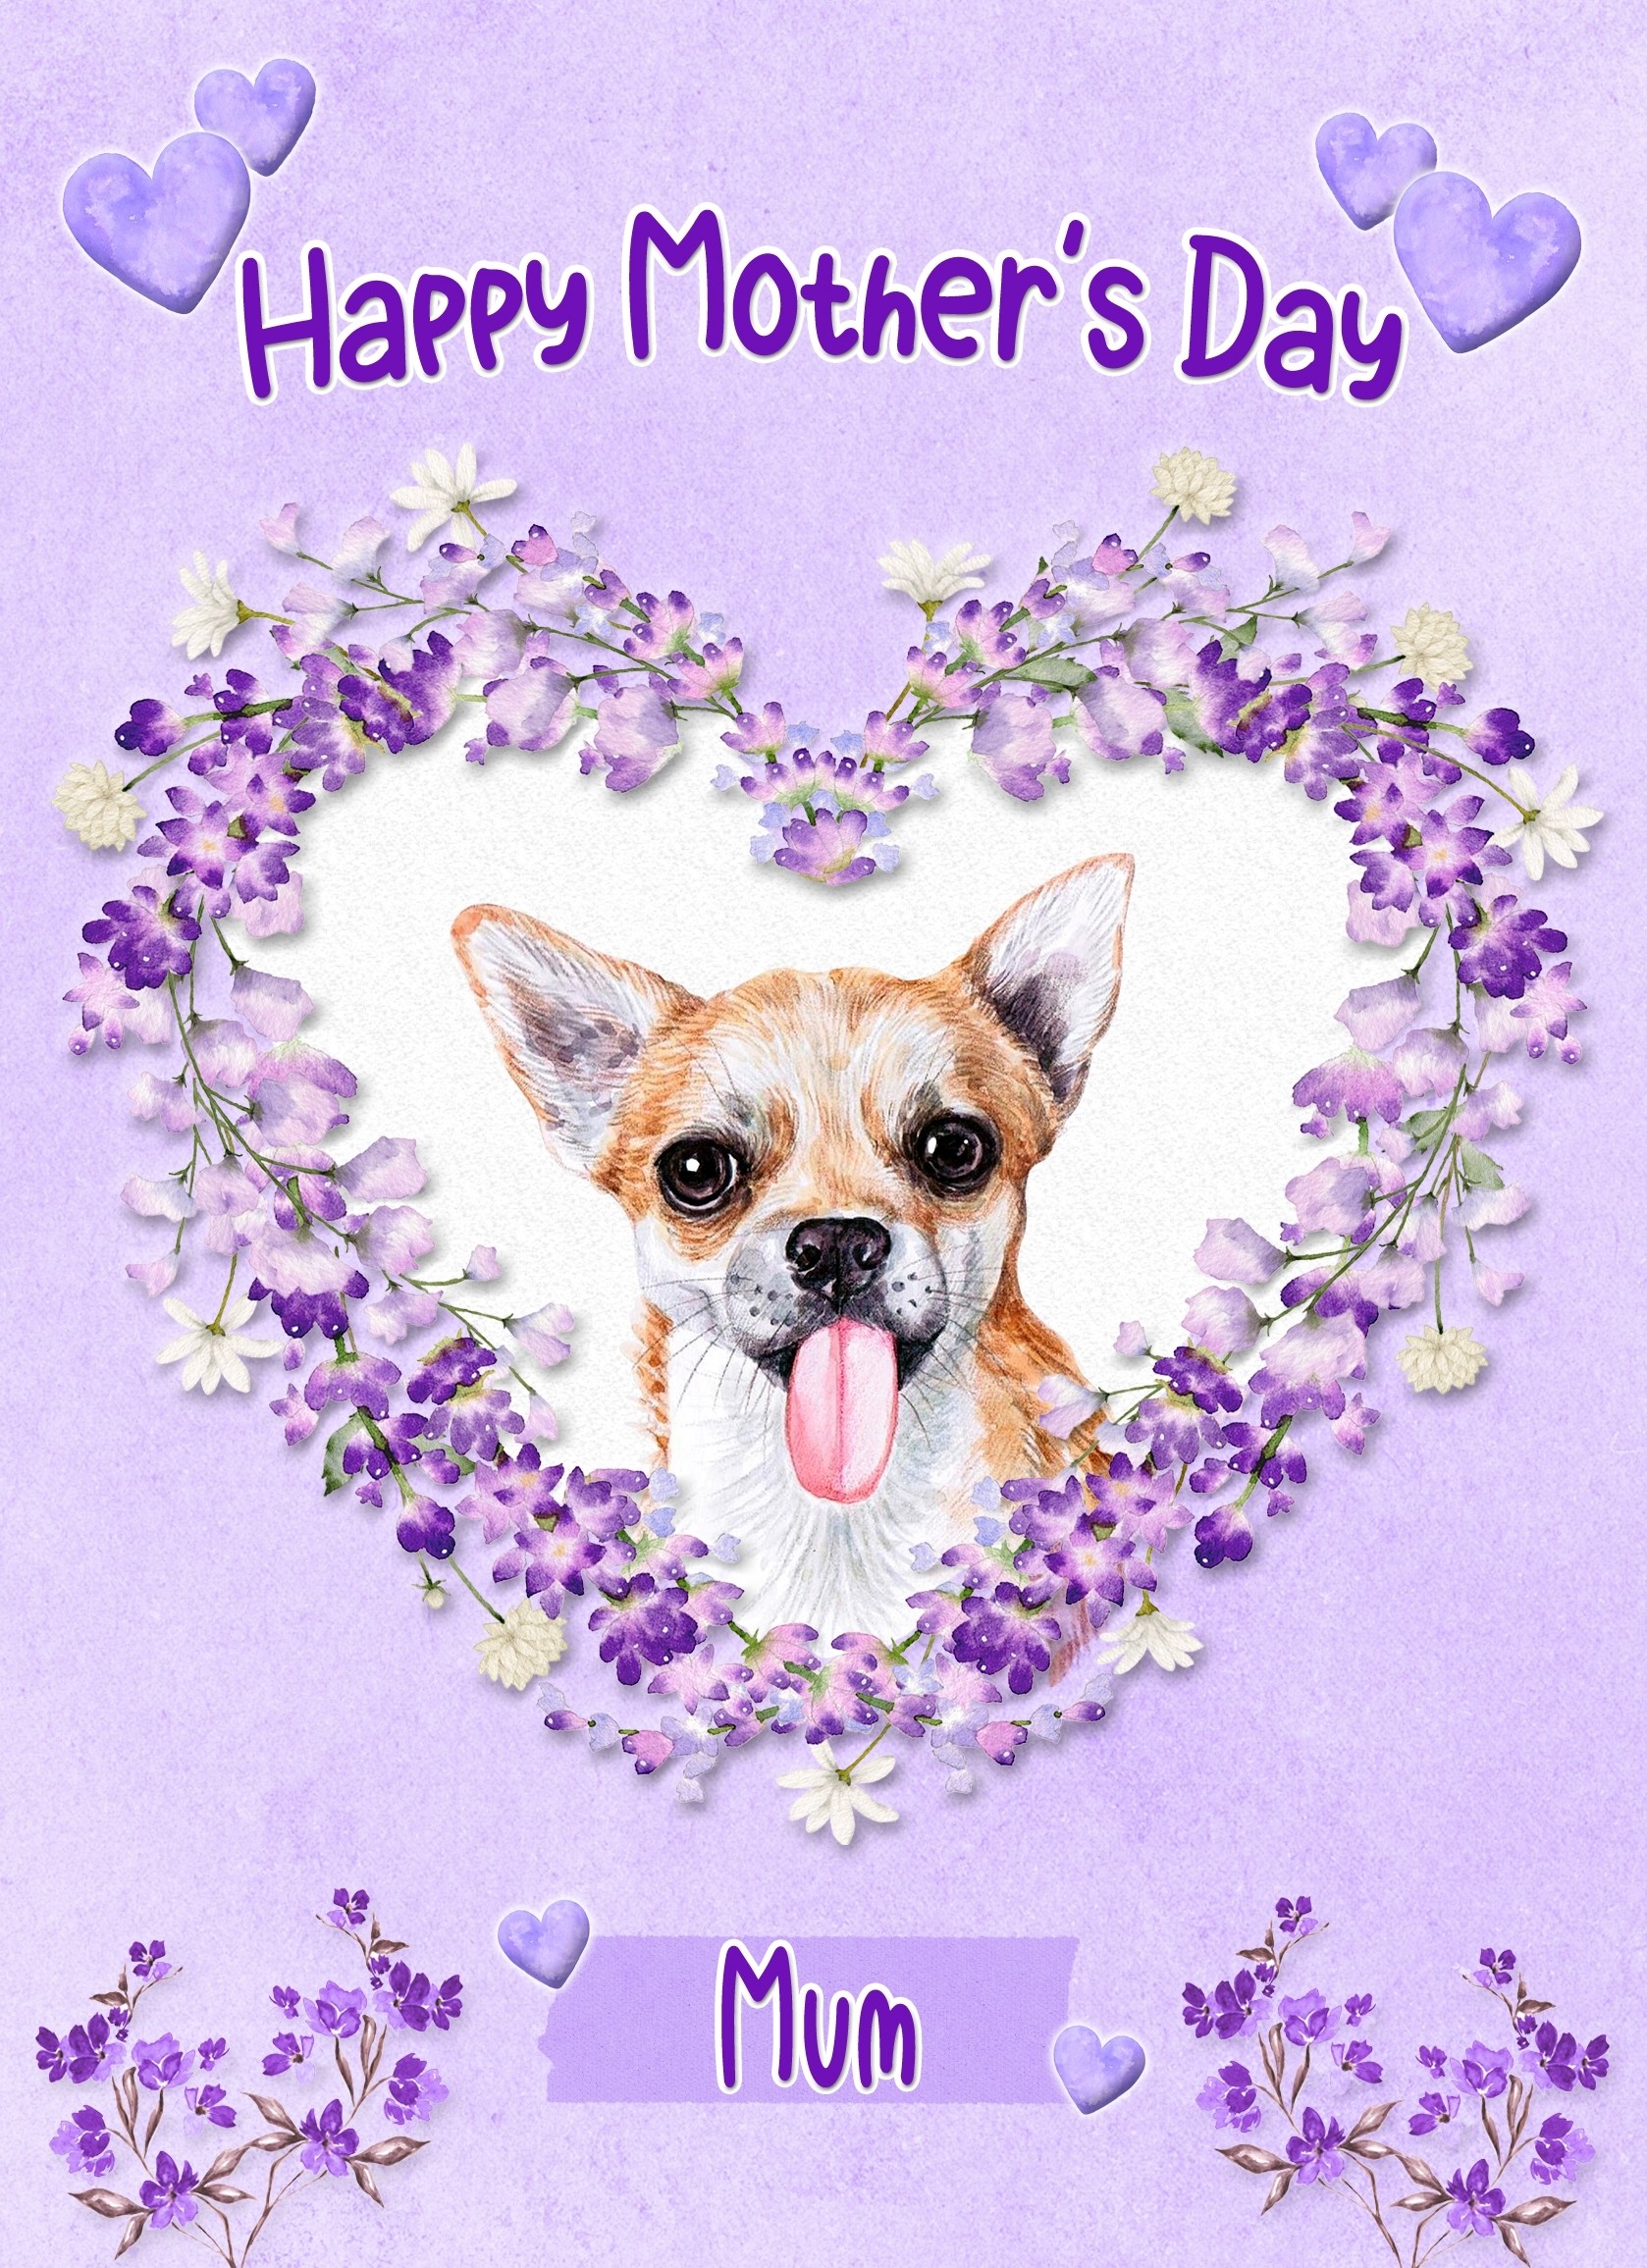 Chihuahua Dog Mothers Day Card (Happy Mothers, Mum)